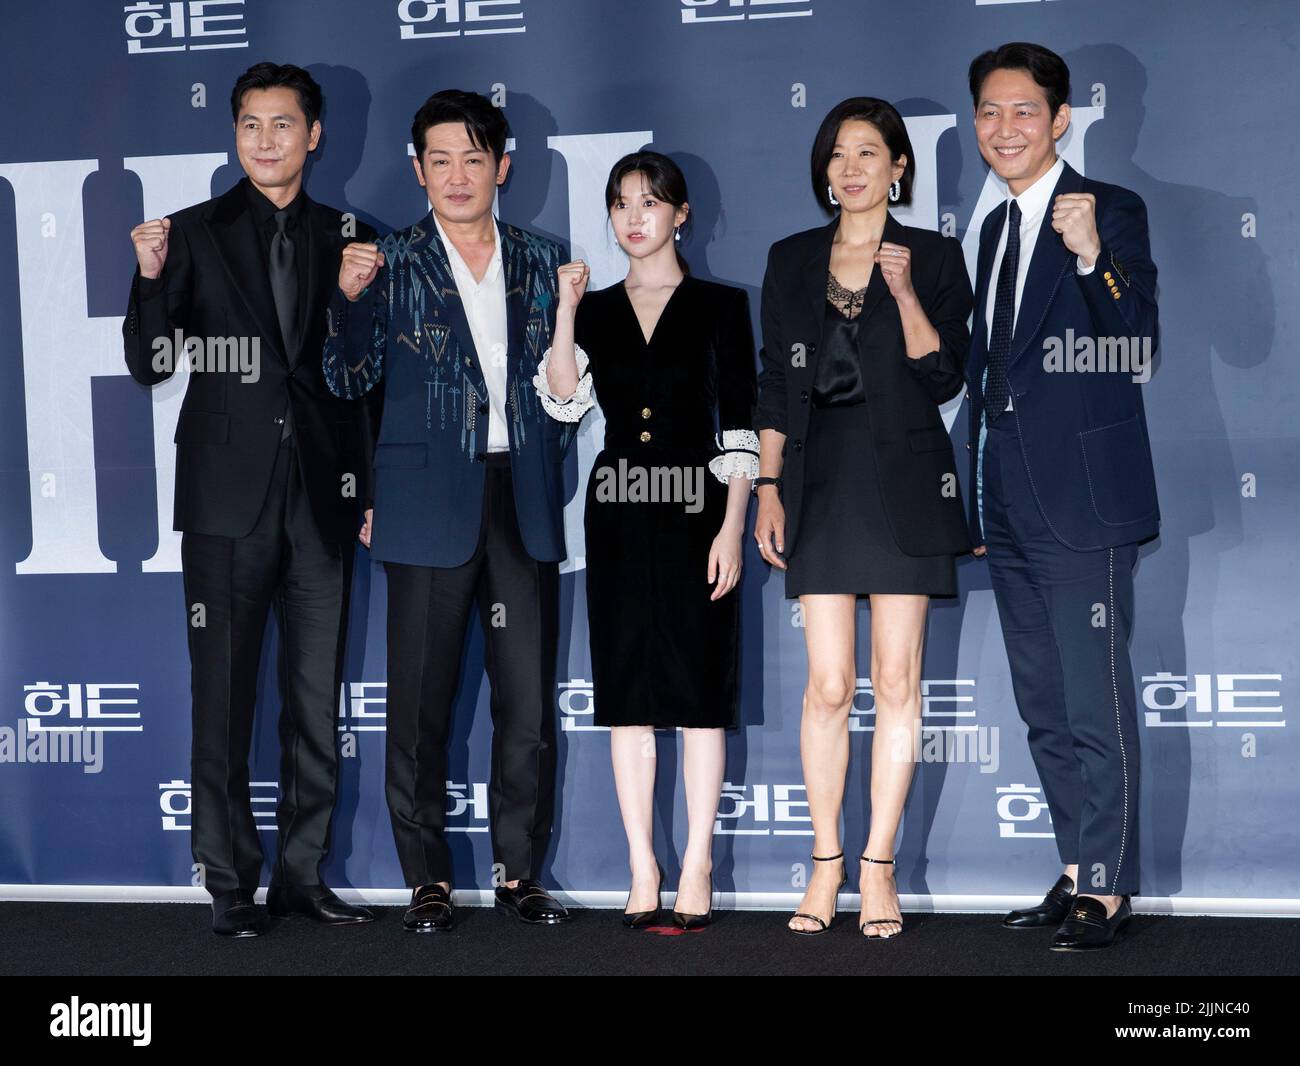 Seoul, South Korea. 27th July, 2022. (L to R) South Korean actors Jung Woo-sung, Heo Sung-tae, actress Go Youn-jung, Jeon Hye-jin, actor and director Lee Jung-jae, pose for photos during a promote their latest movie 'Hunt' in Seoul, South Korea on July 27, 2022. The movie is to be released in the country on Aug 10. (Photo by: Lee Young-ho/Sipa USA) Credit: Sipa USA/Alamy Live News Stock Photo